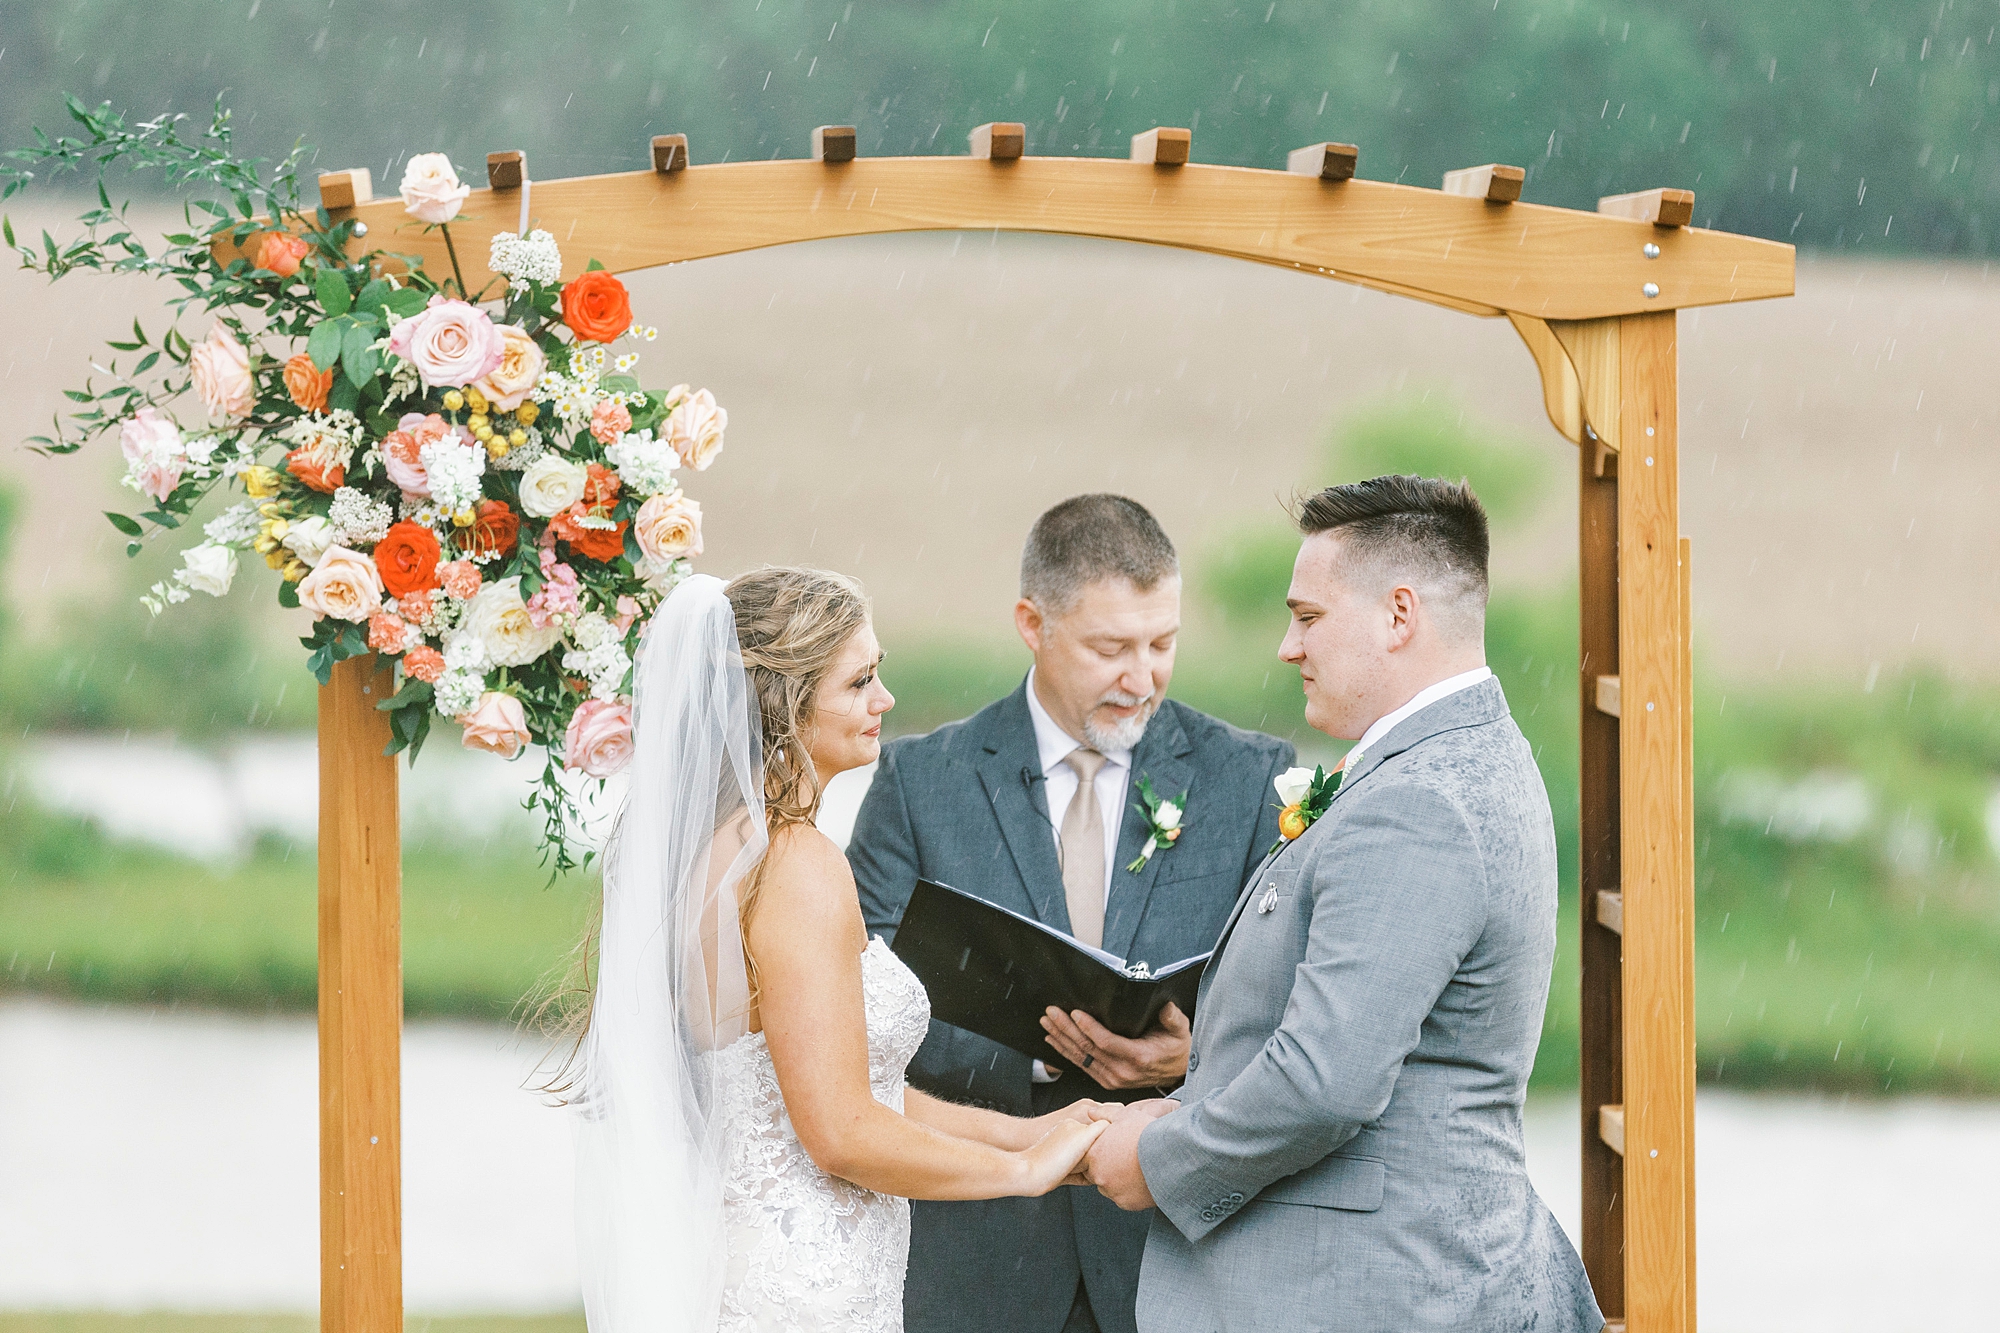 rainy wedding ceremony at The Stable at Riverview